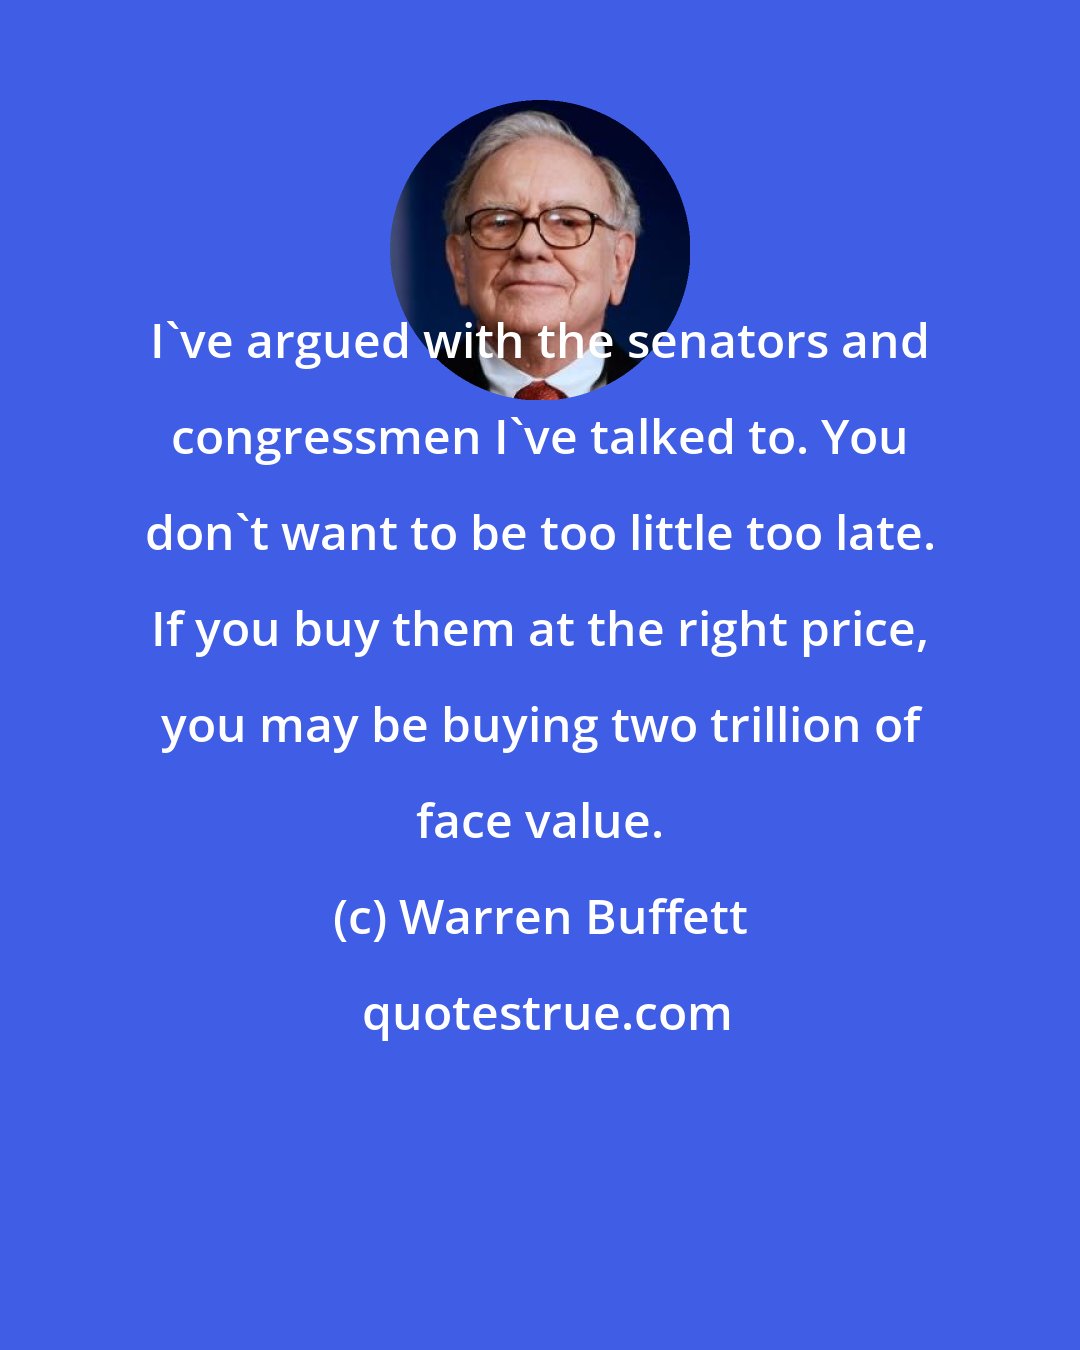 Warren Buffett: I've argued with the senators and congressmen I've talked to. You don't want to be too little too late. If you buy them at the right price, you may be buying two trillion of face value.